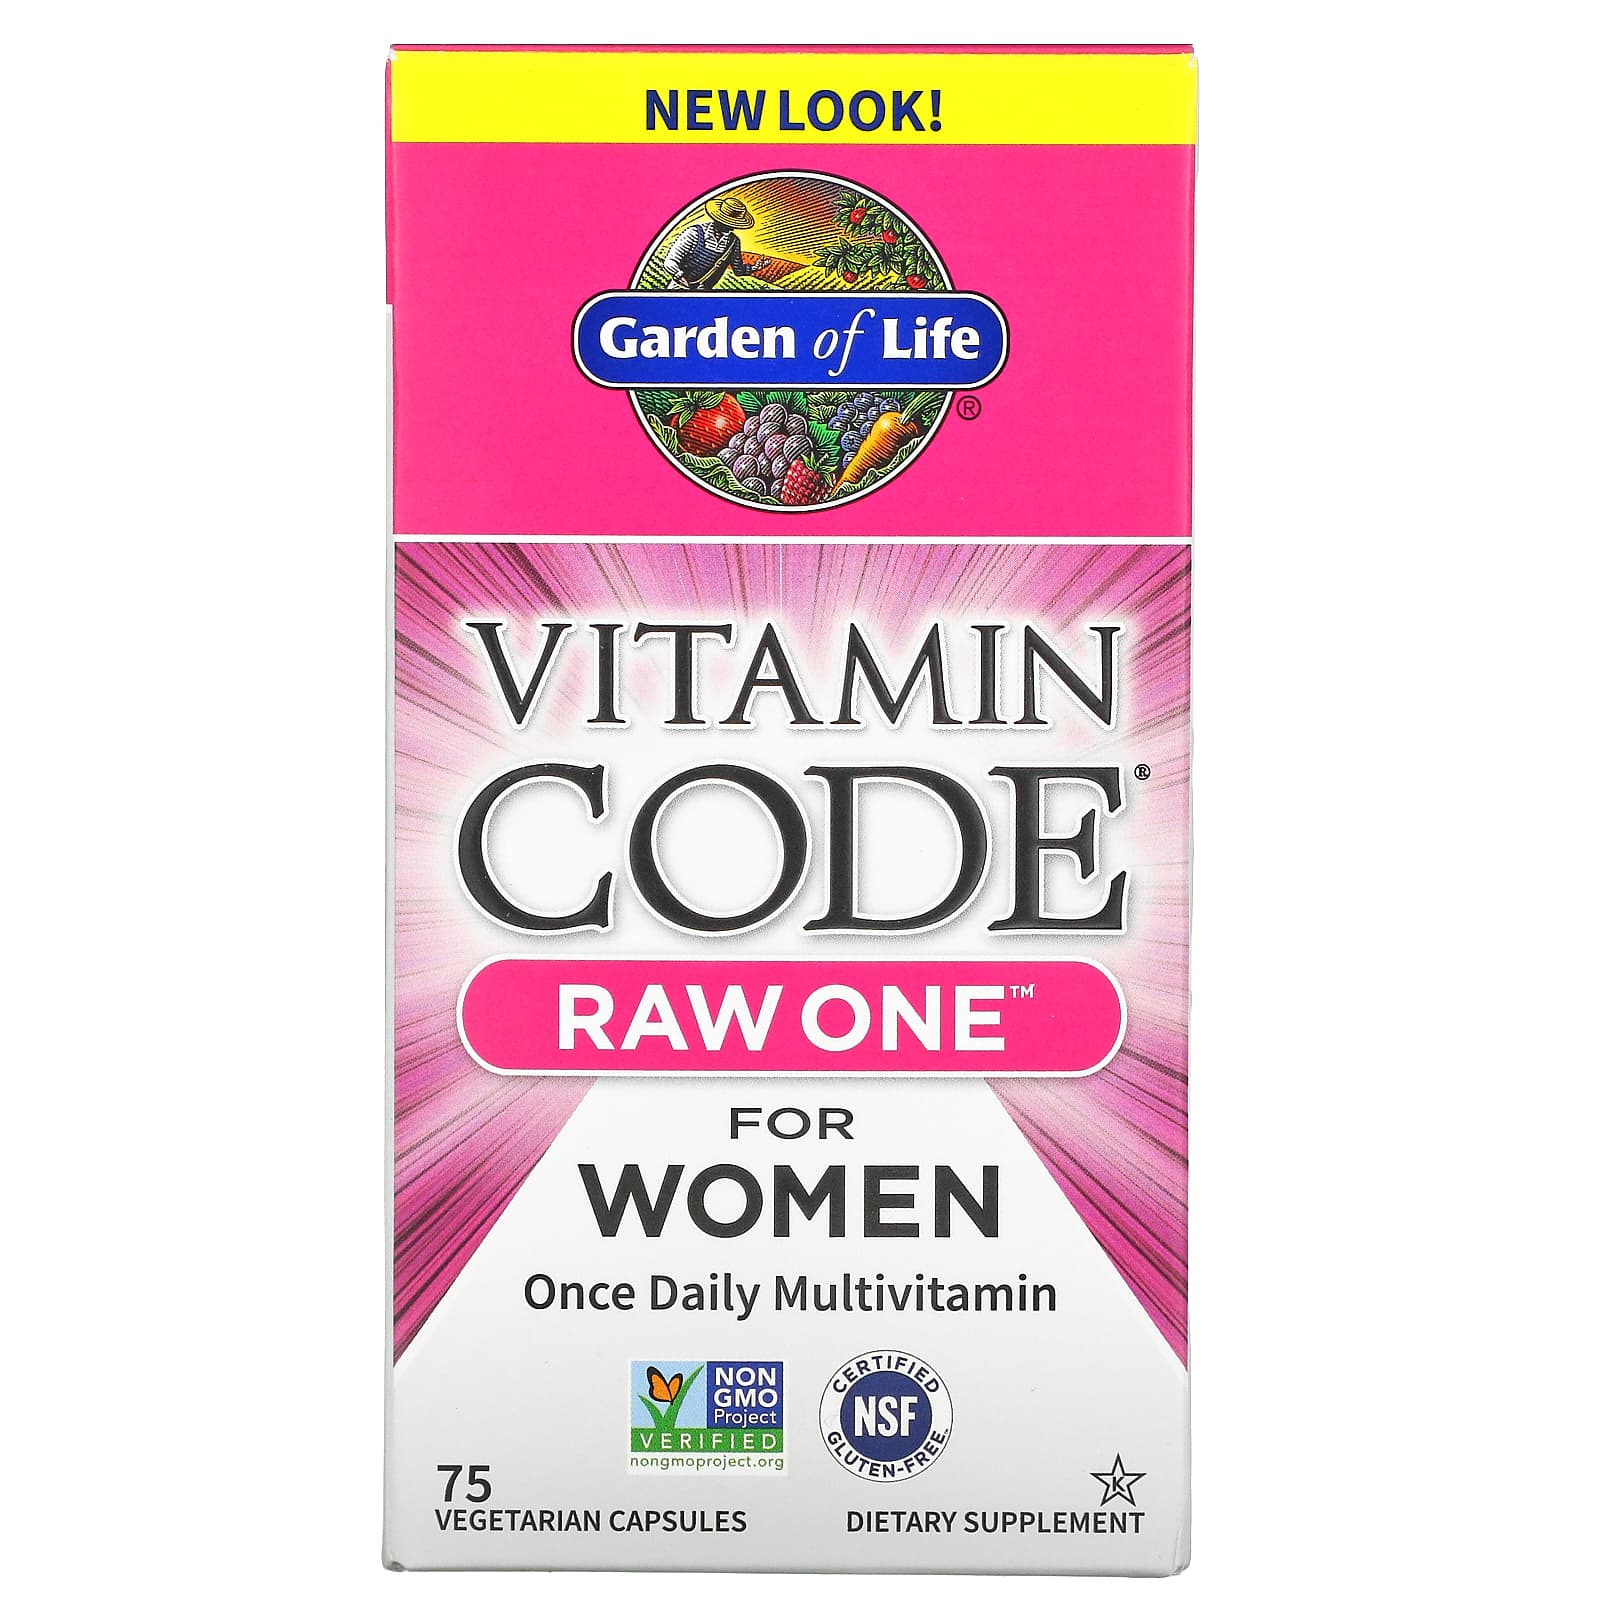 Garden of Life Vitamin Code, Raw One, Once Daily Multi-Vitamin For Women, 75 Vegetarian Capsules